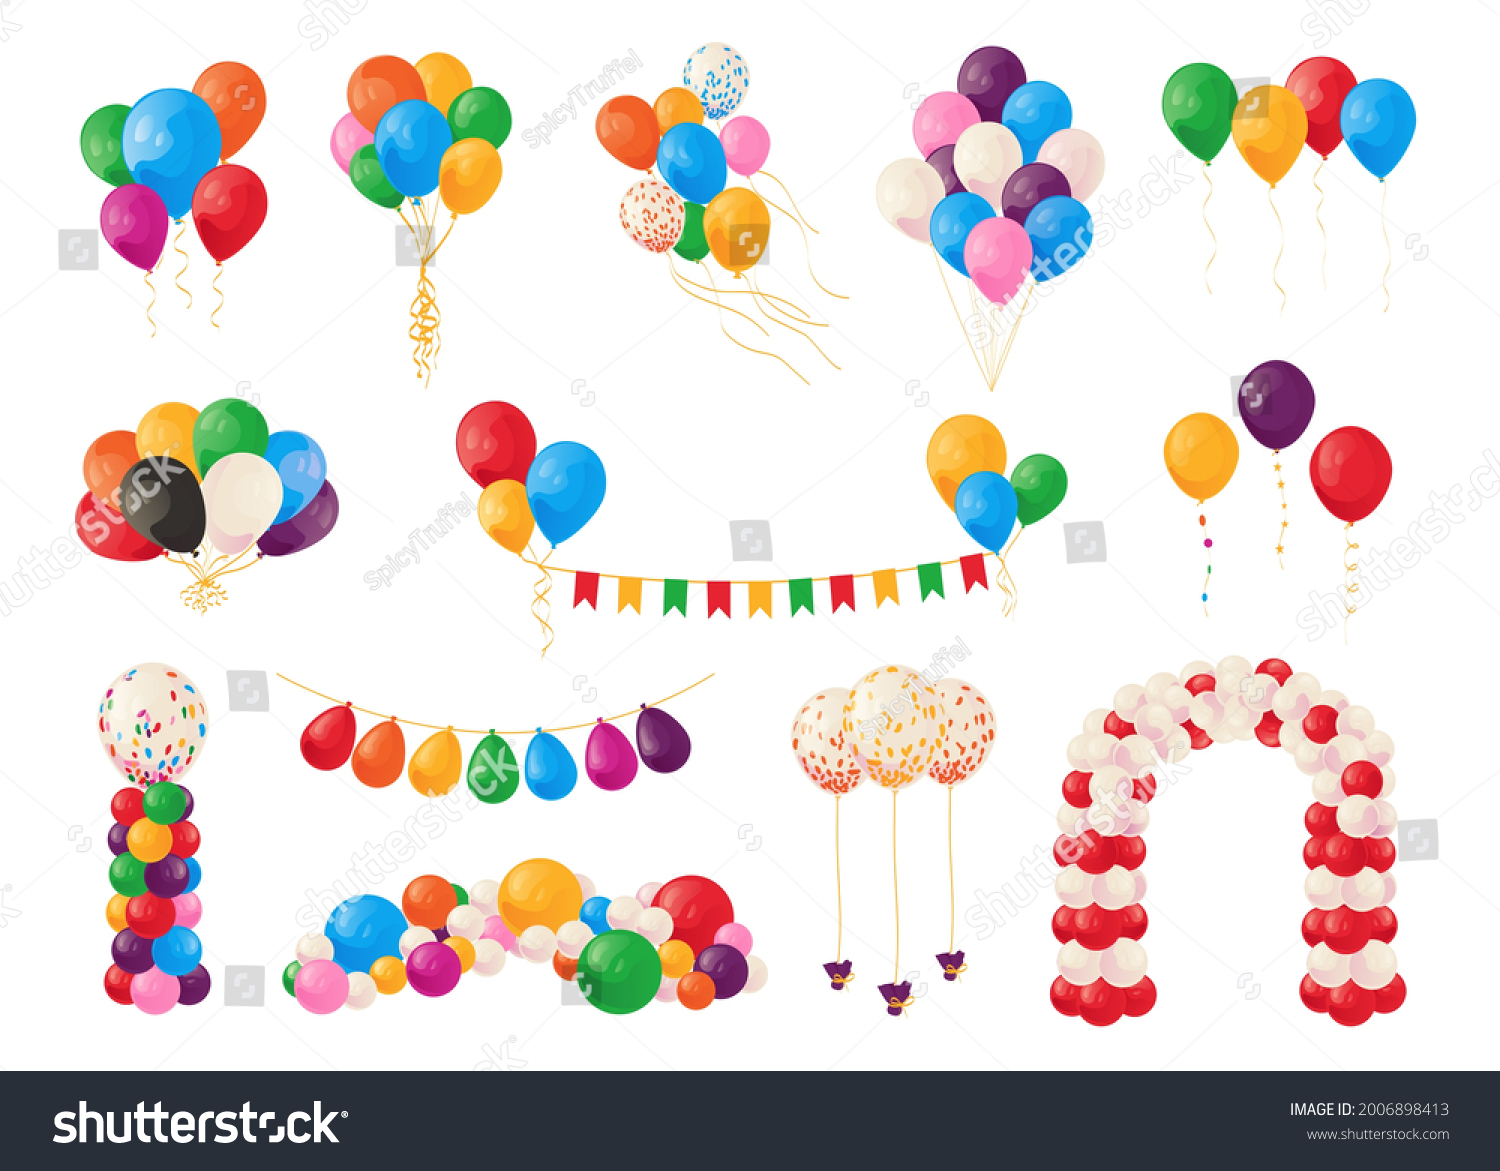 SVG of Cartoon balloons. Birthday party celebrate and carnival decoration elements. Bunch of festive bright glossy helium spheres. Garland and arch template. Vector flying inflated balls set svg